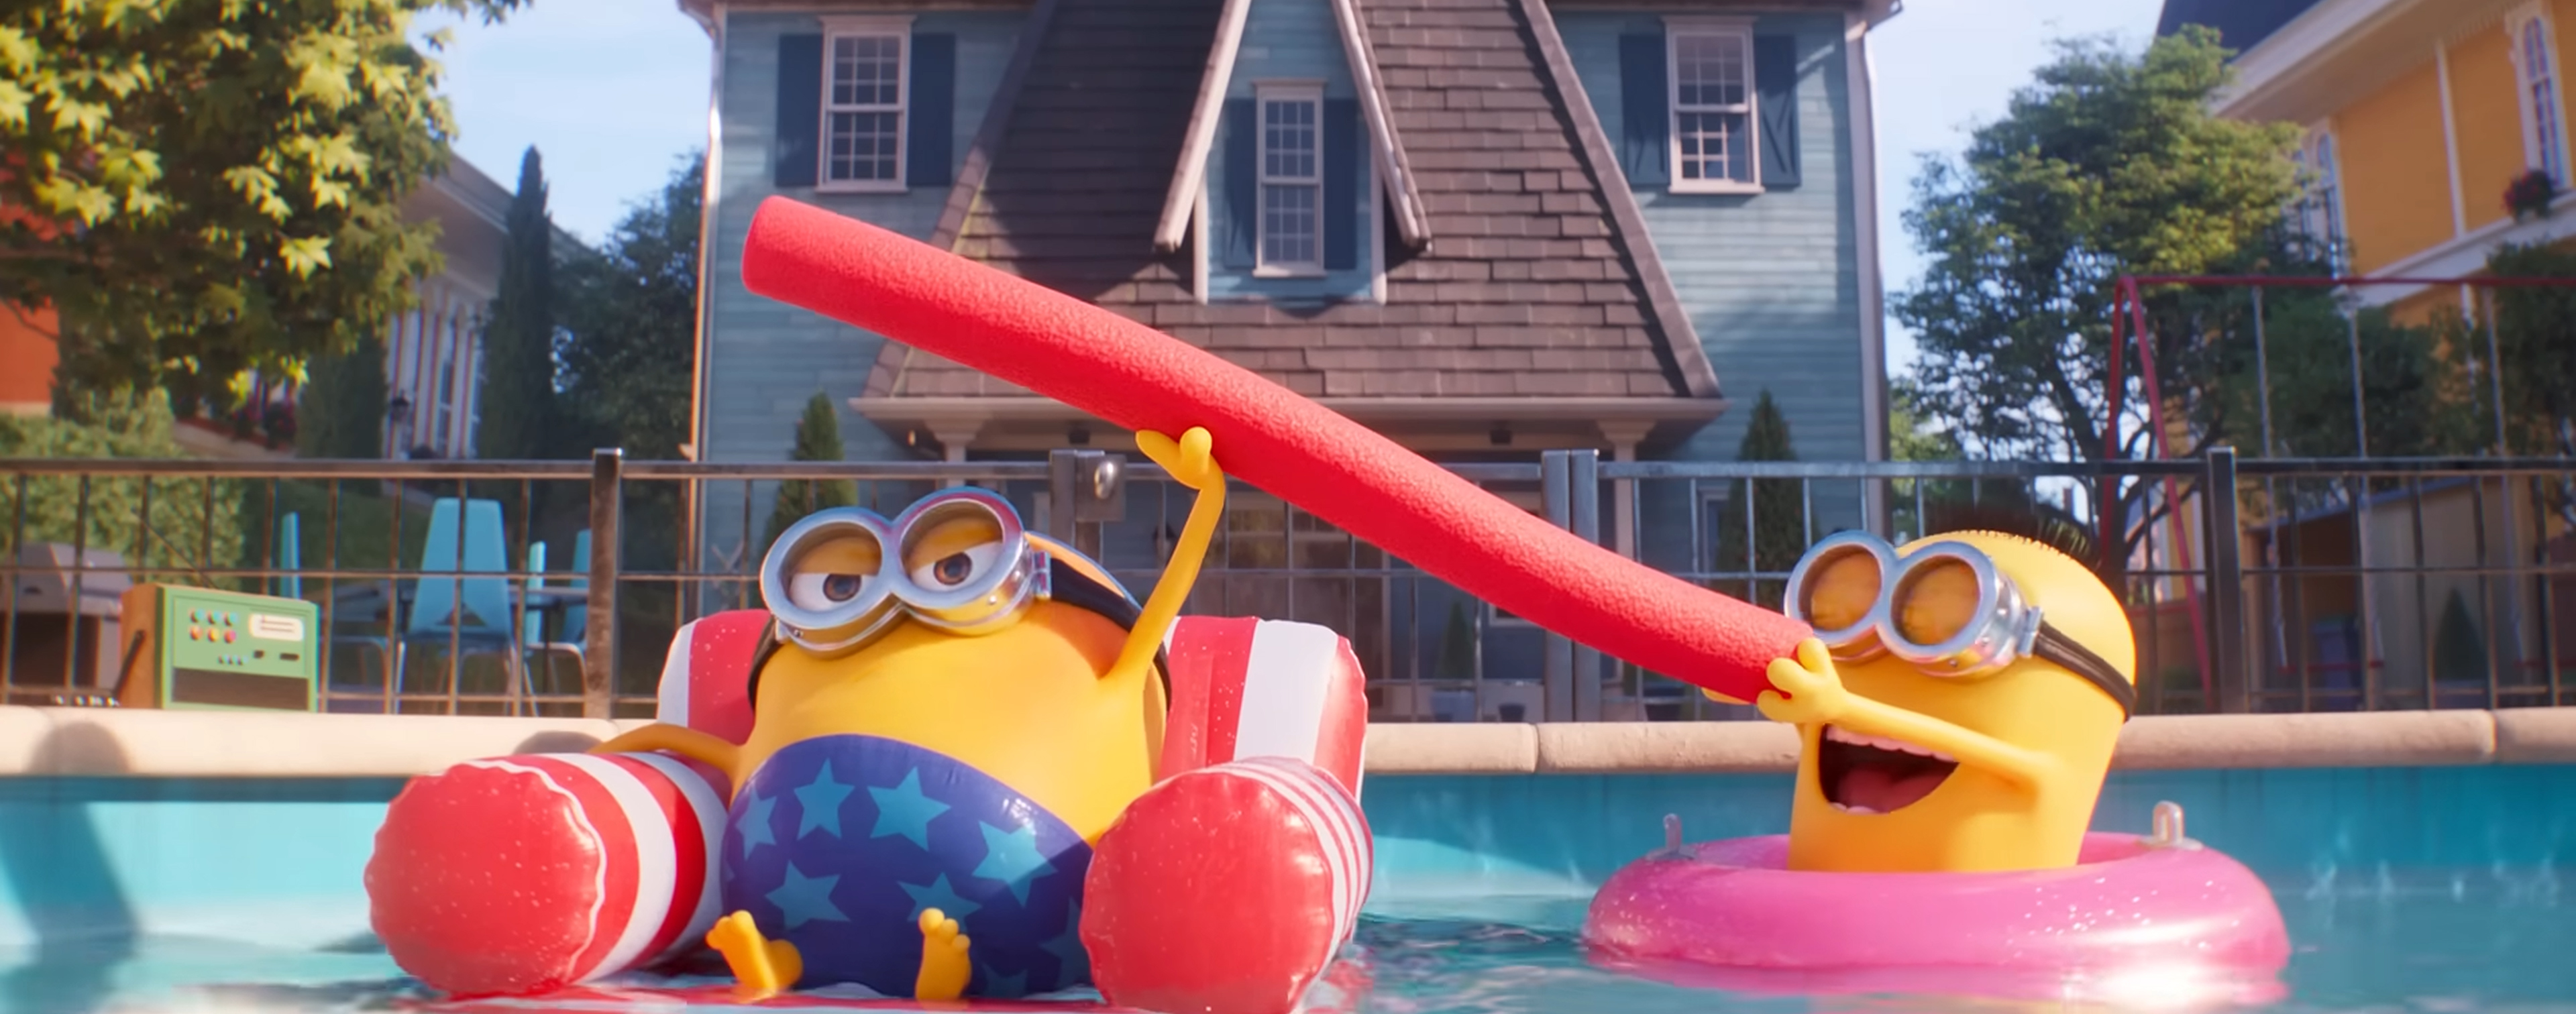 Minions in a pool.